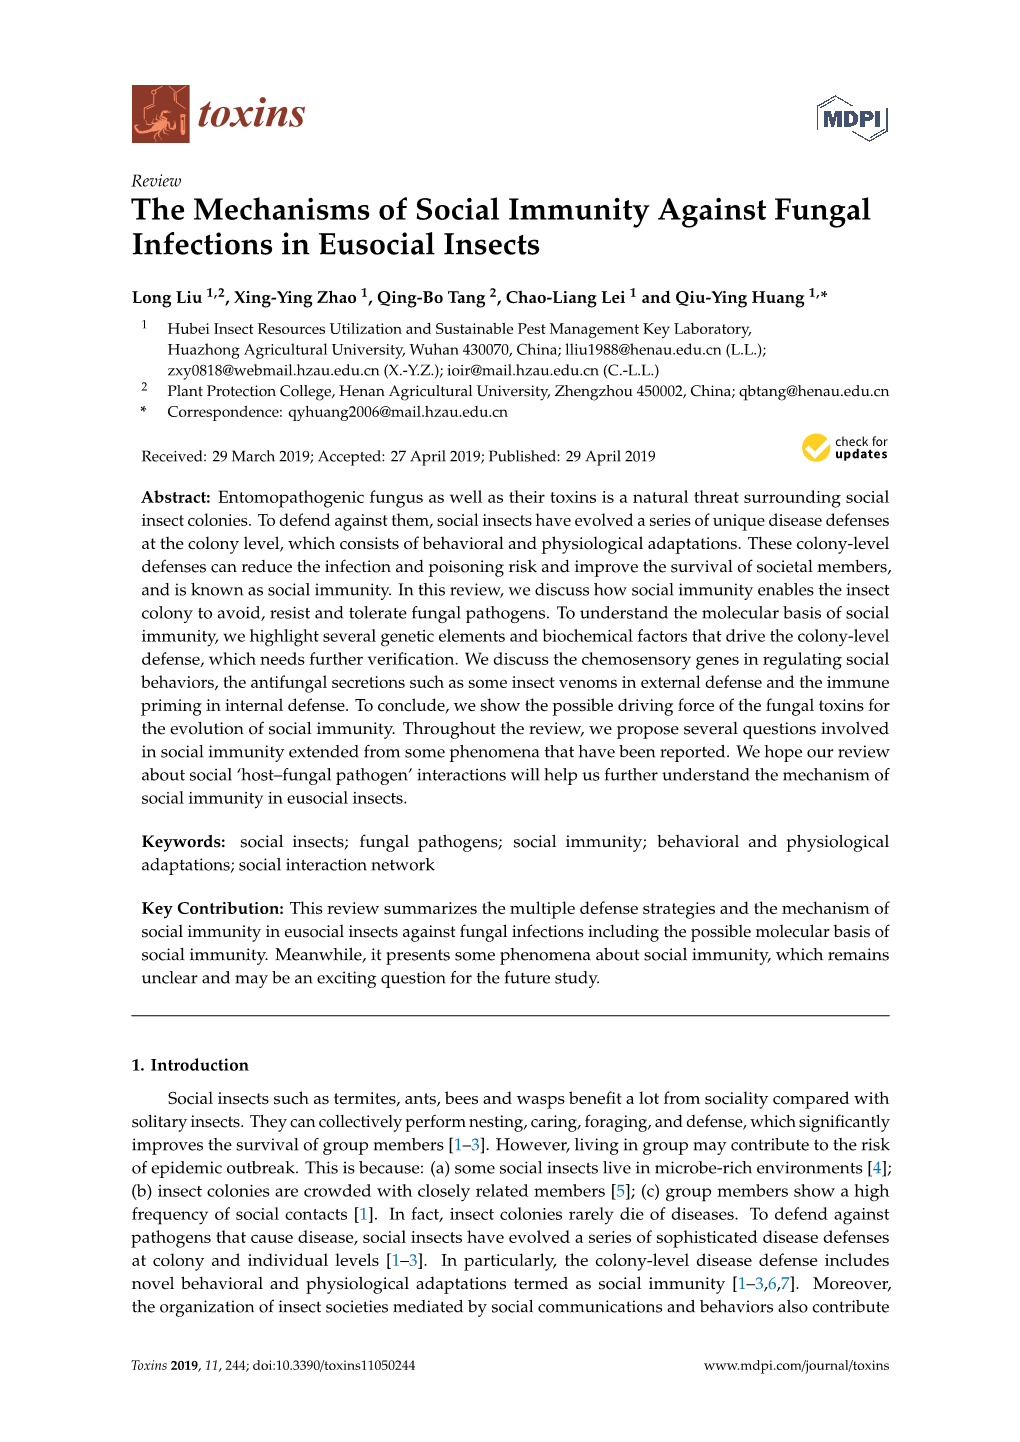 The Mechanisms of Social Immunity Against Fungal Infections in Eusocial Insects